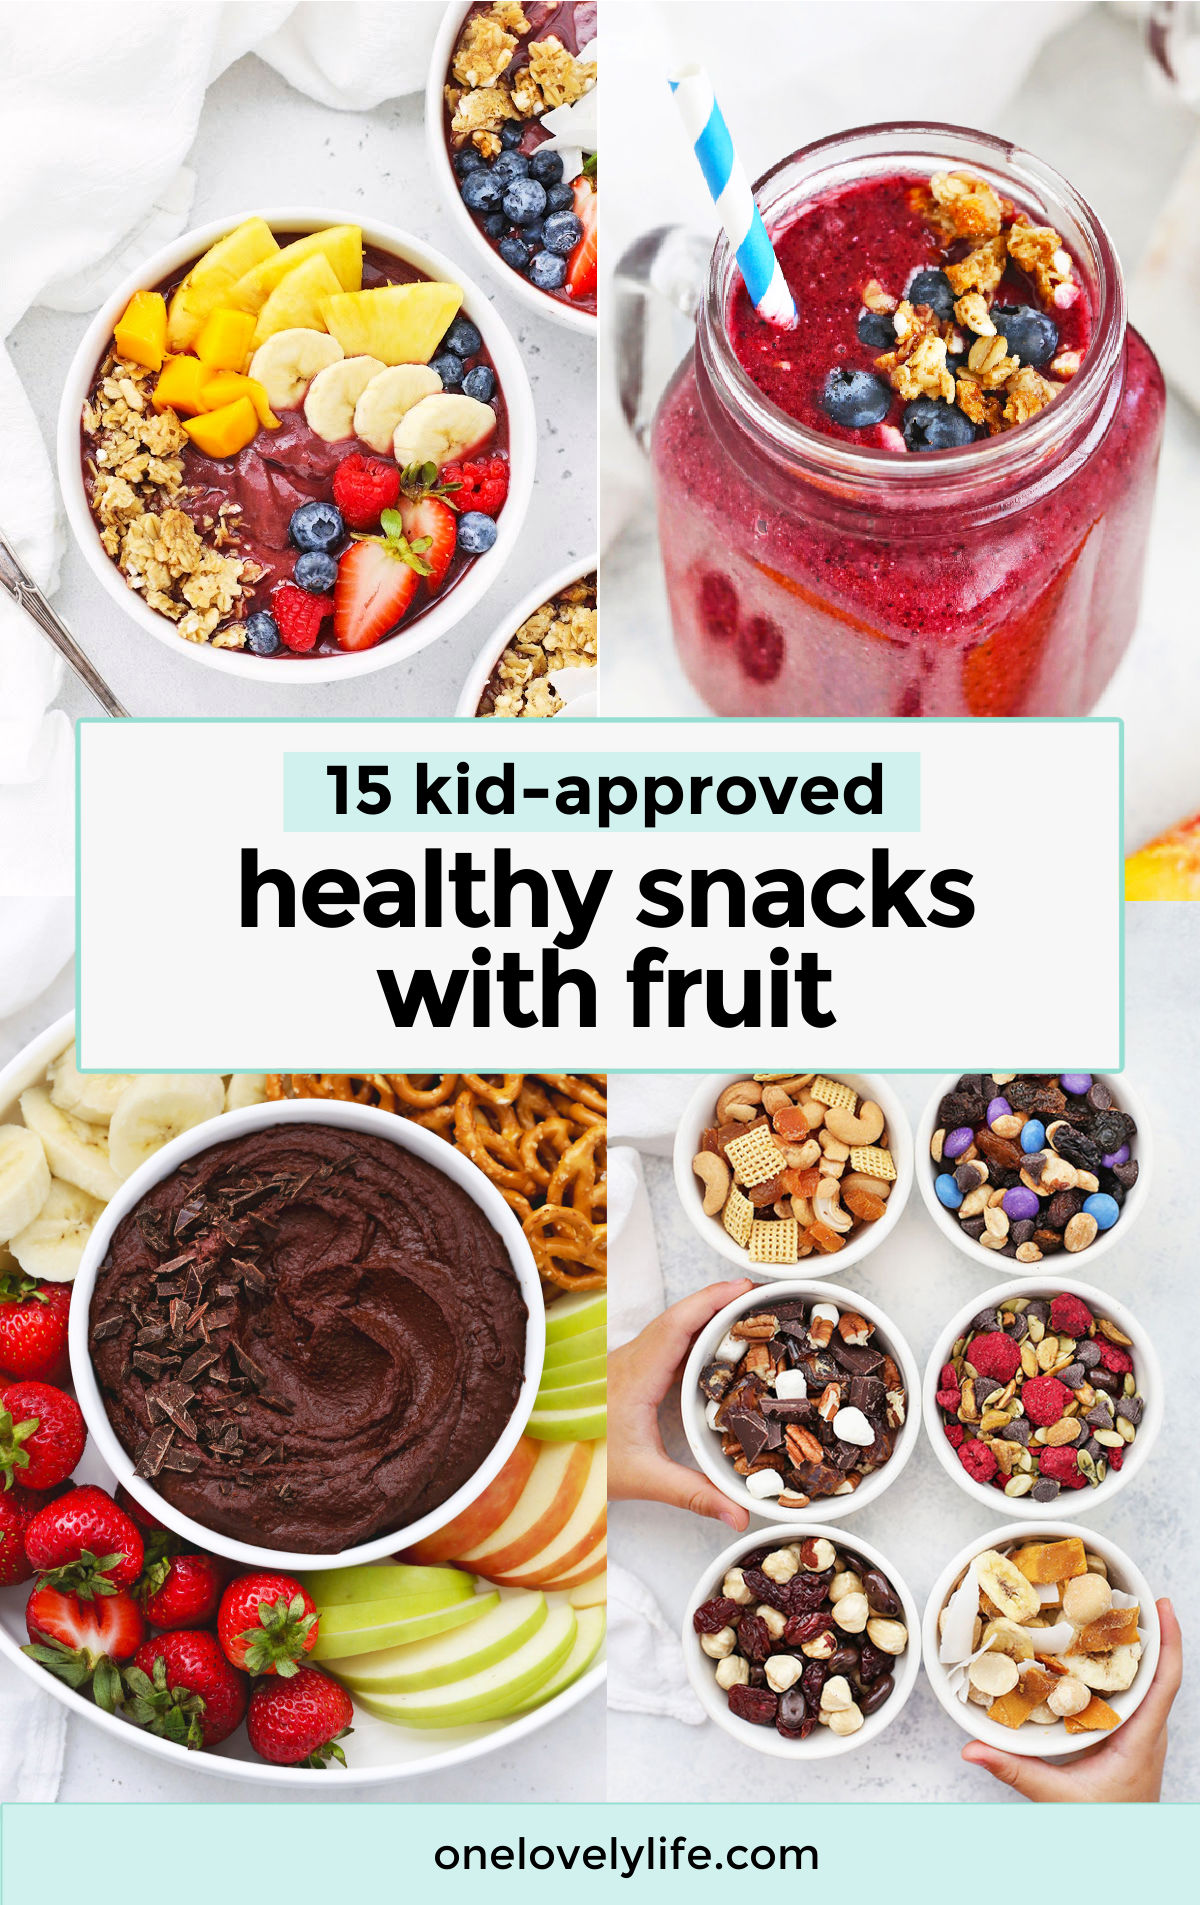 15+ Healthy Snacks with Fruit - These Healthy Snack Ideas are totally kid approved! (Gluten free, vegan, and paleo options!) // Healthy kids Snacks // Healthy Snacks for Kids #healthysnack #kidssnacks #funsnack #fruit